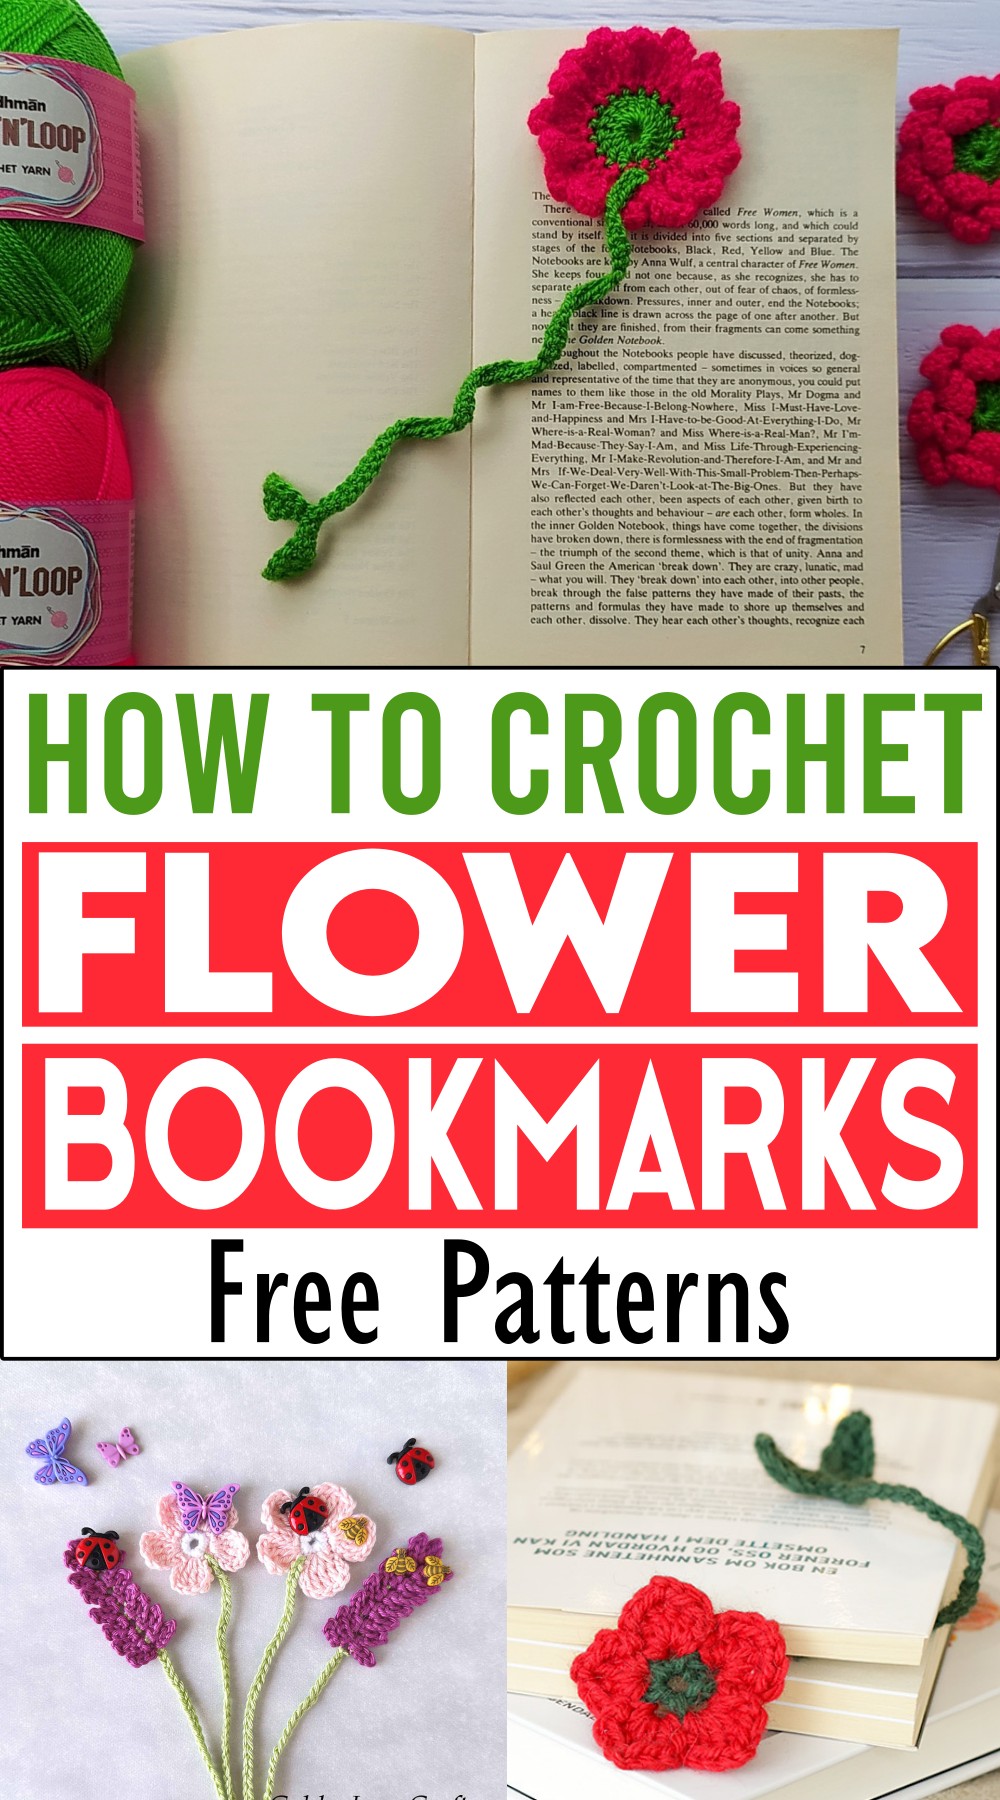 How to Crochet Flower Bookmarks